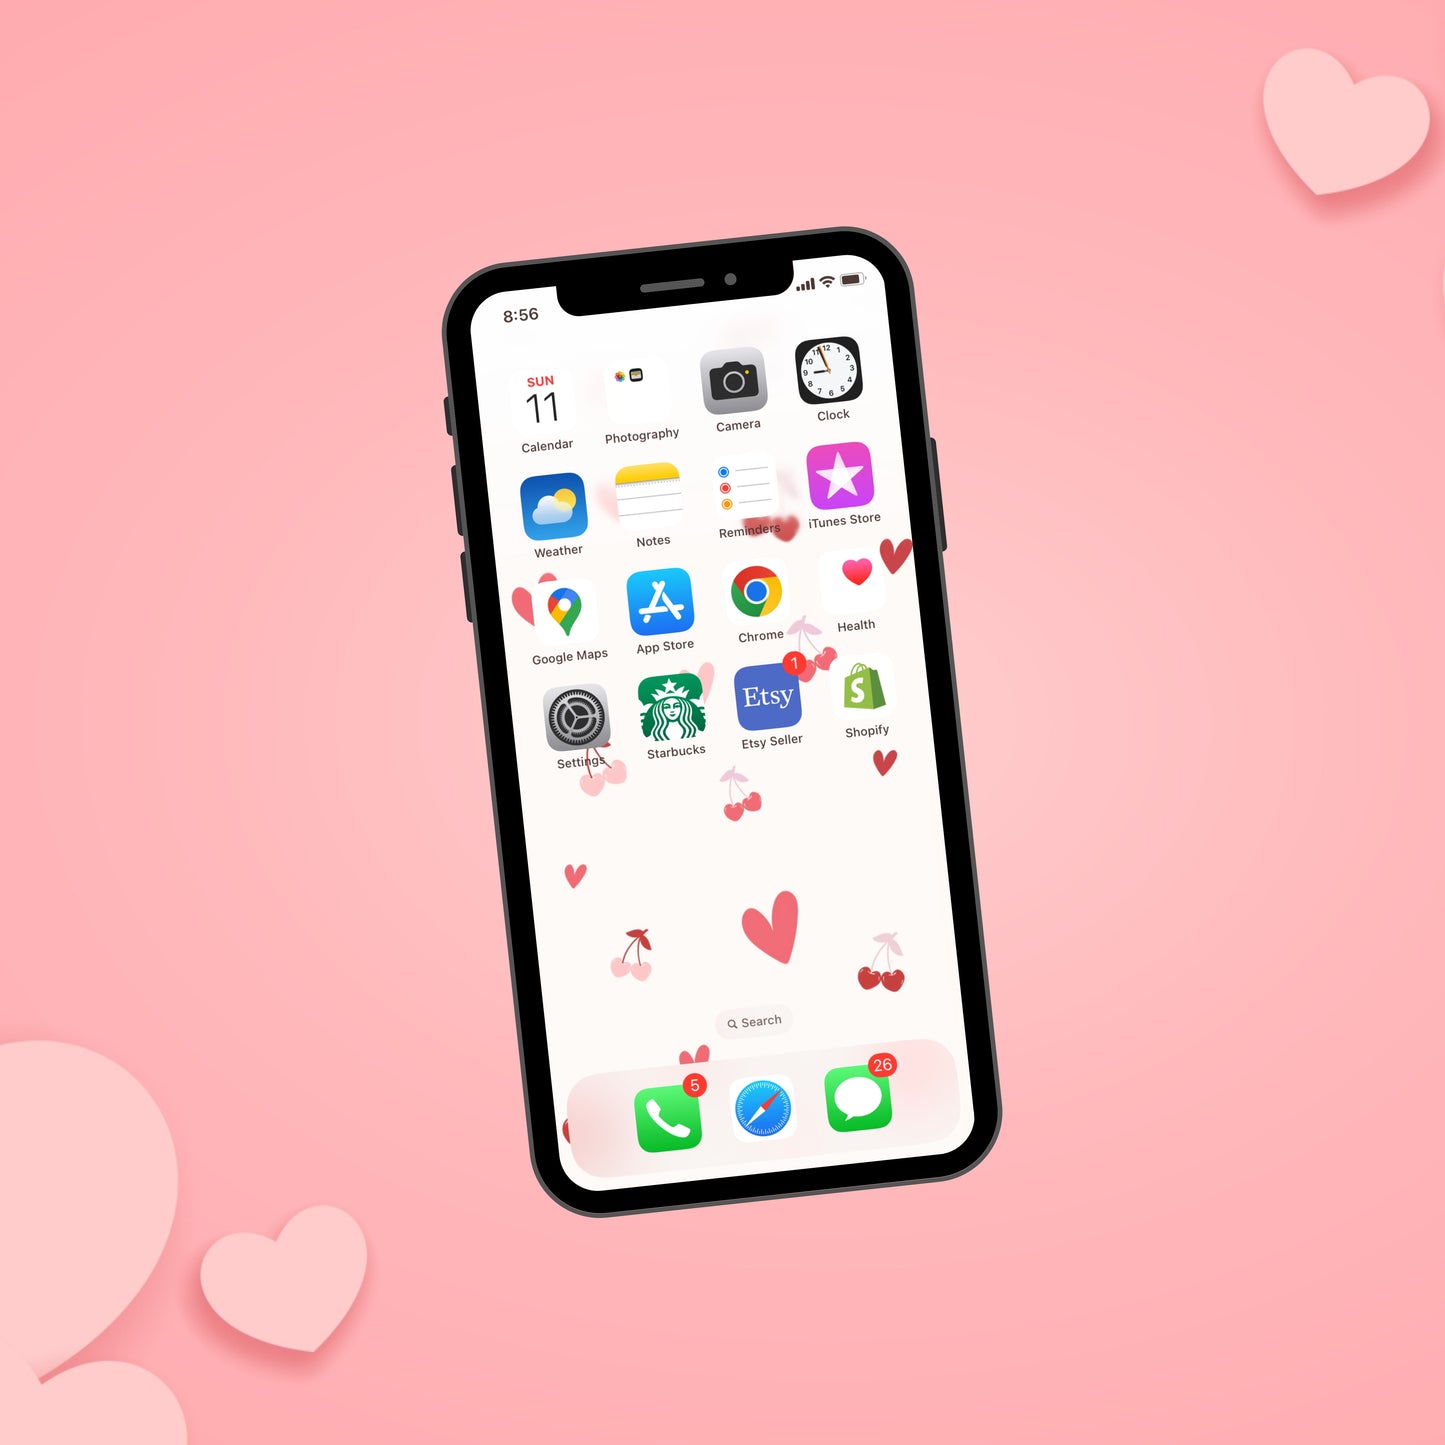 Proudly display the phrase "Love Believes Protects Defends Respects" in a beautiful red and pink retro font. Let your device be a beacon of empowerment reminding everyone what true love is for a survivor. Make your devices your daily affirmations.